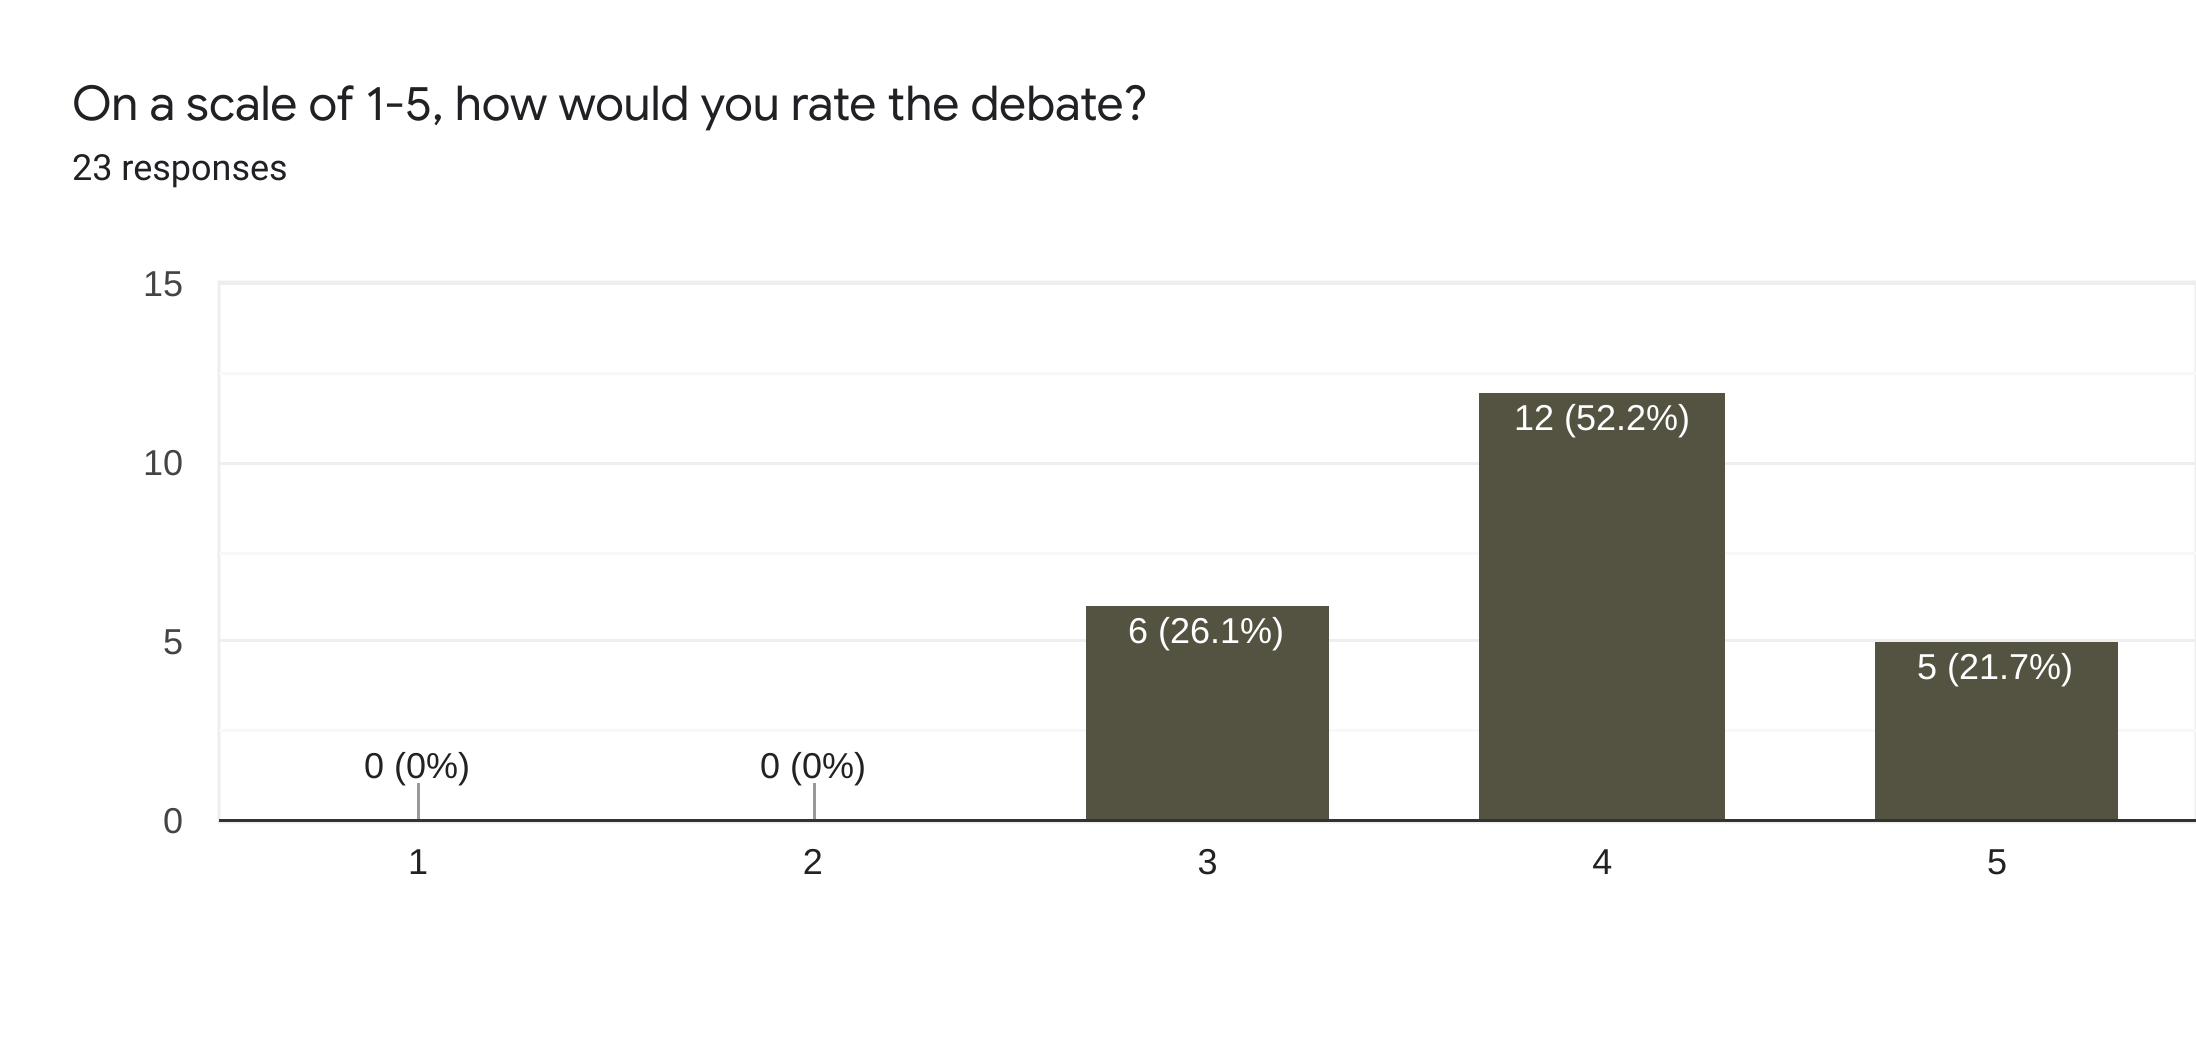 Forms response chart. Question title: On a scale of 1-5, how would you rate the debate?. Number of responses: 23 responses.